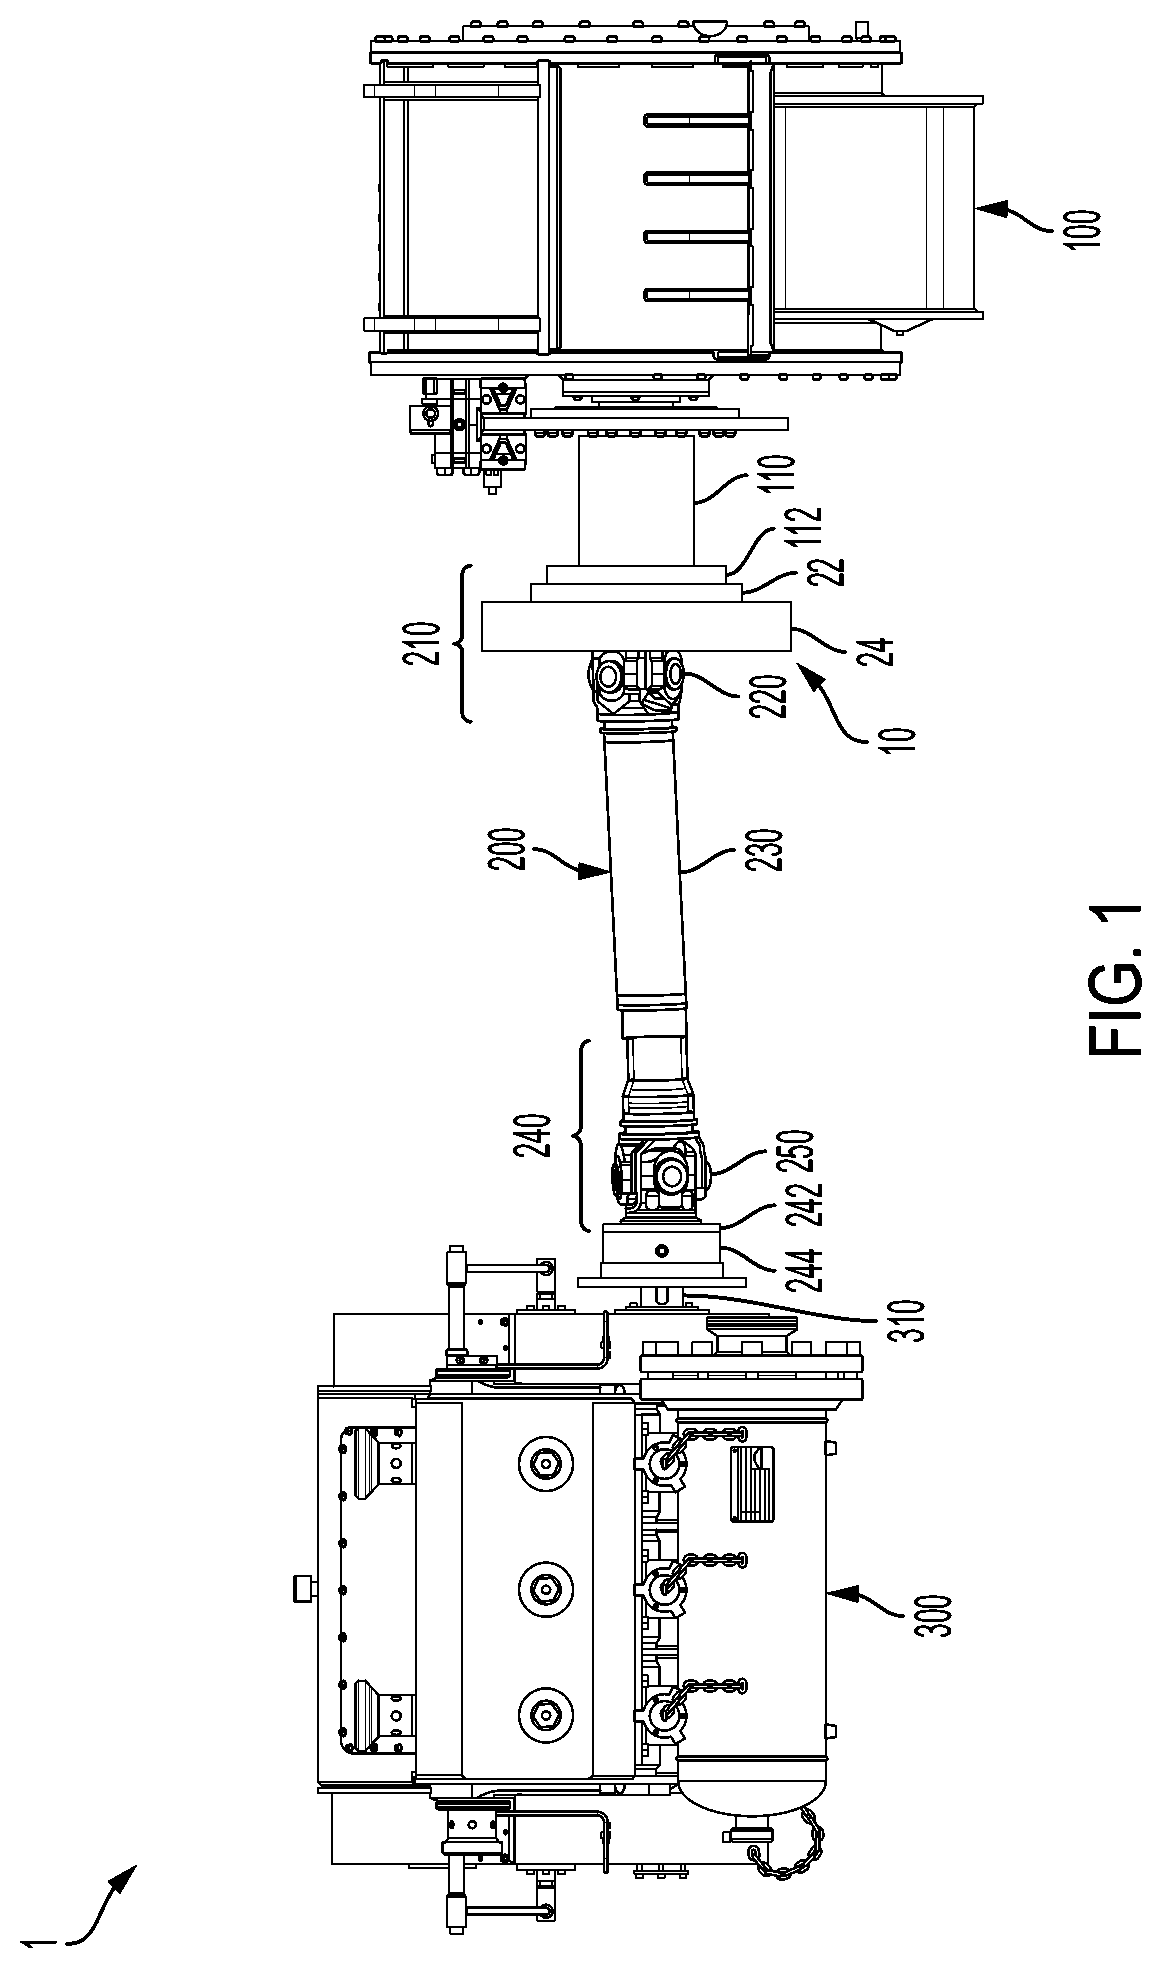 Systems and method for use of single mass flywheel alongside torsional vibration damper assembly for single acting reciprocating pump